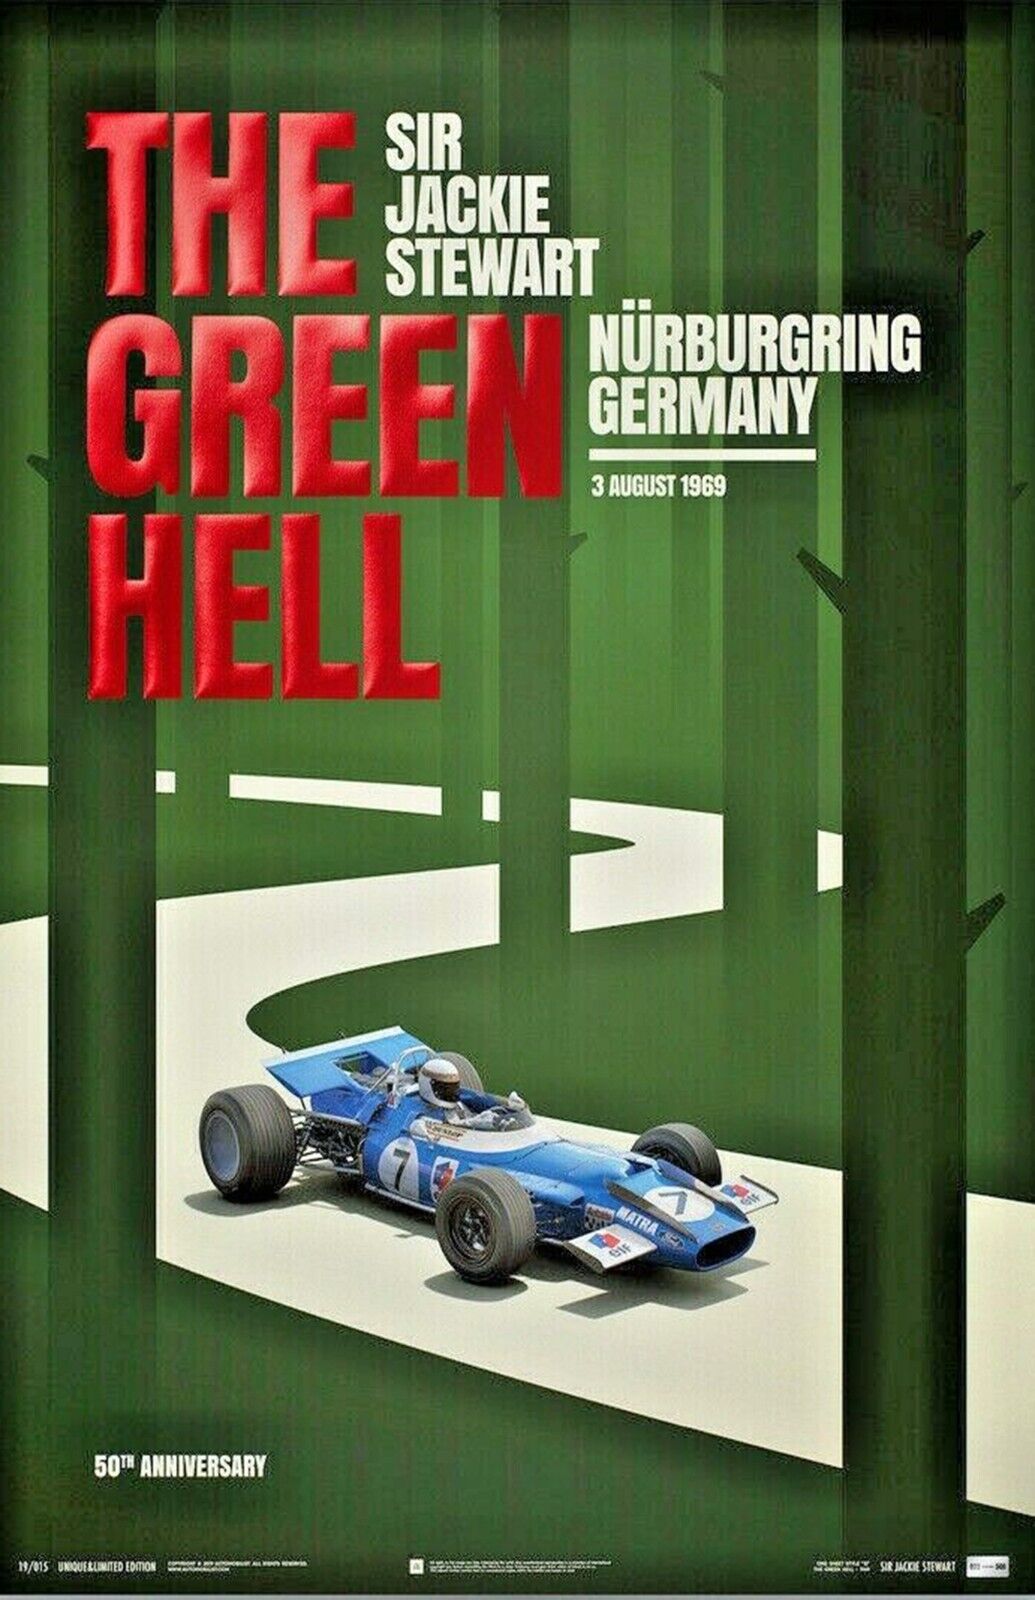 THE AWESOME GREEN HELL RACING POSTER SIR JACKIE STEWART